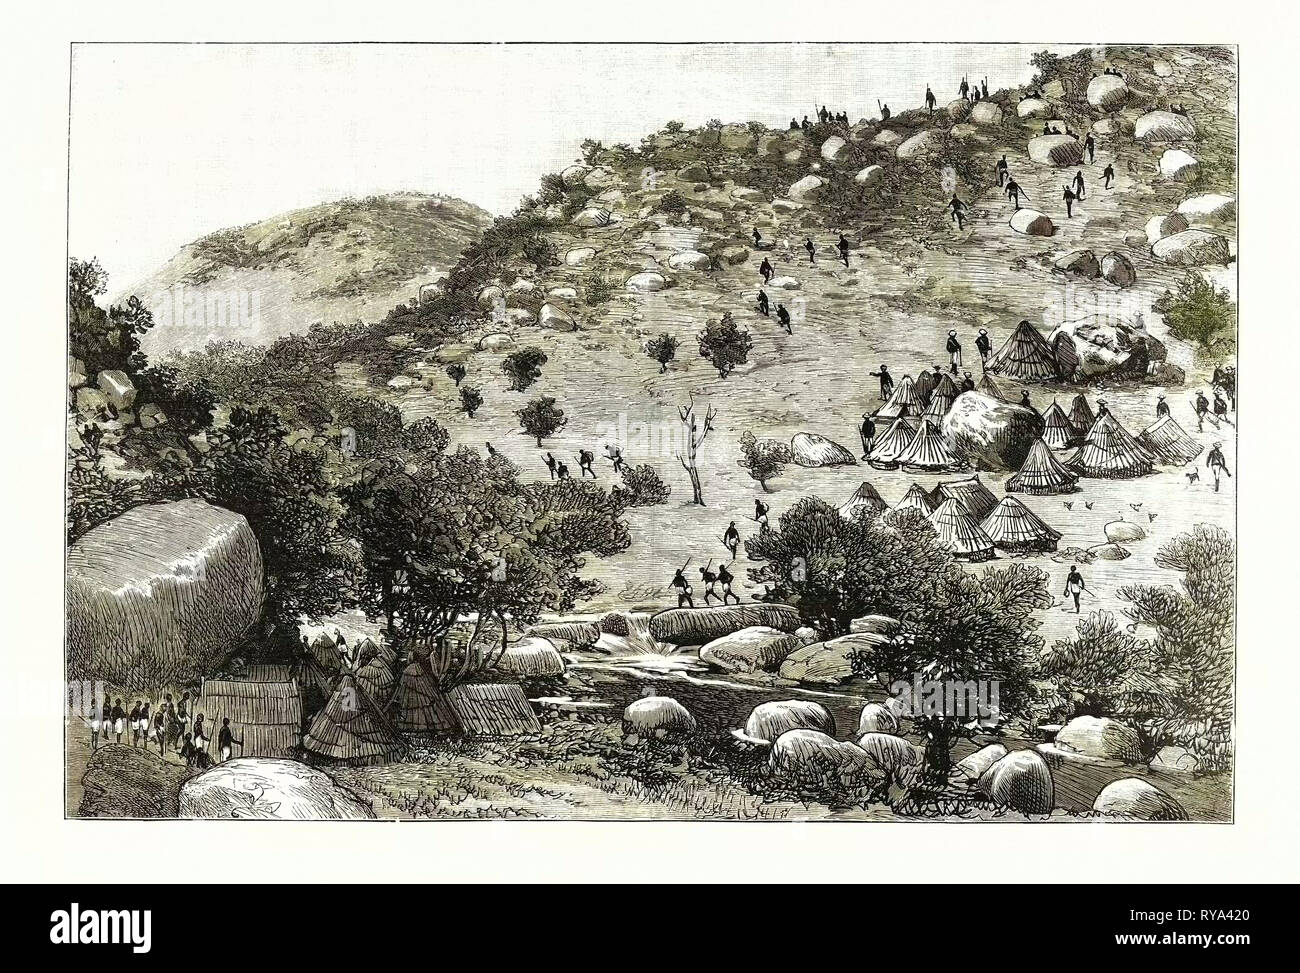 The Collision Between English and Portuguese in Manicaland: The Capture of the Portuguese Camp in the Valley below Umtasa's Kraal by the British South Africa Co.'s Police Stock Photo